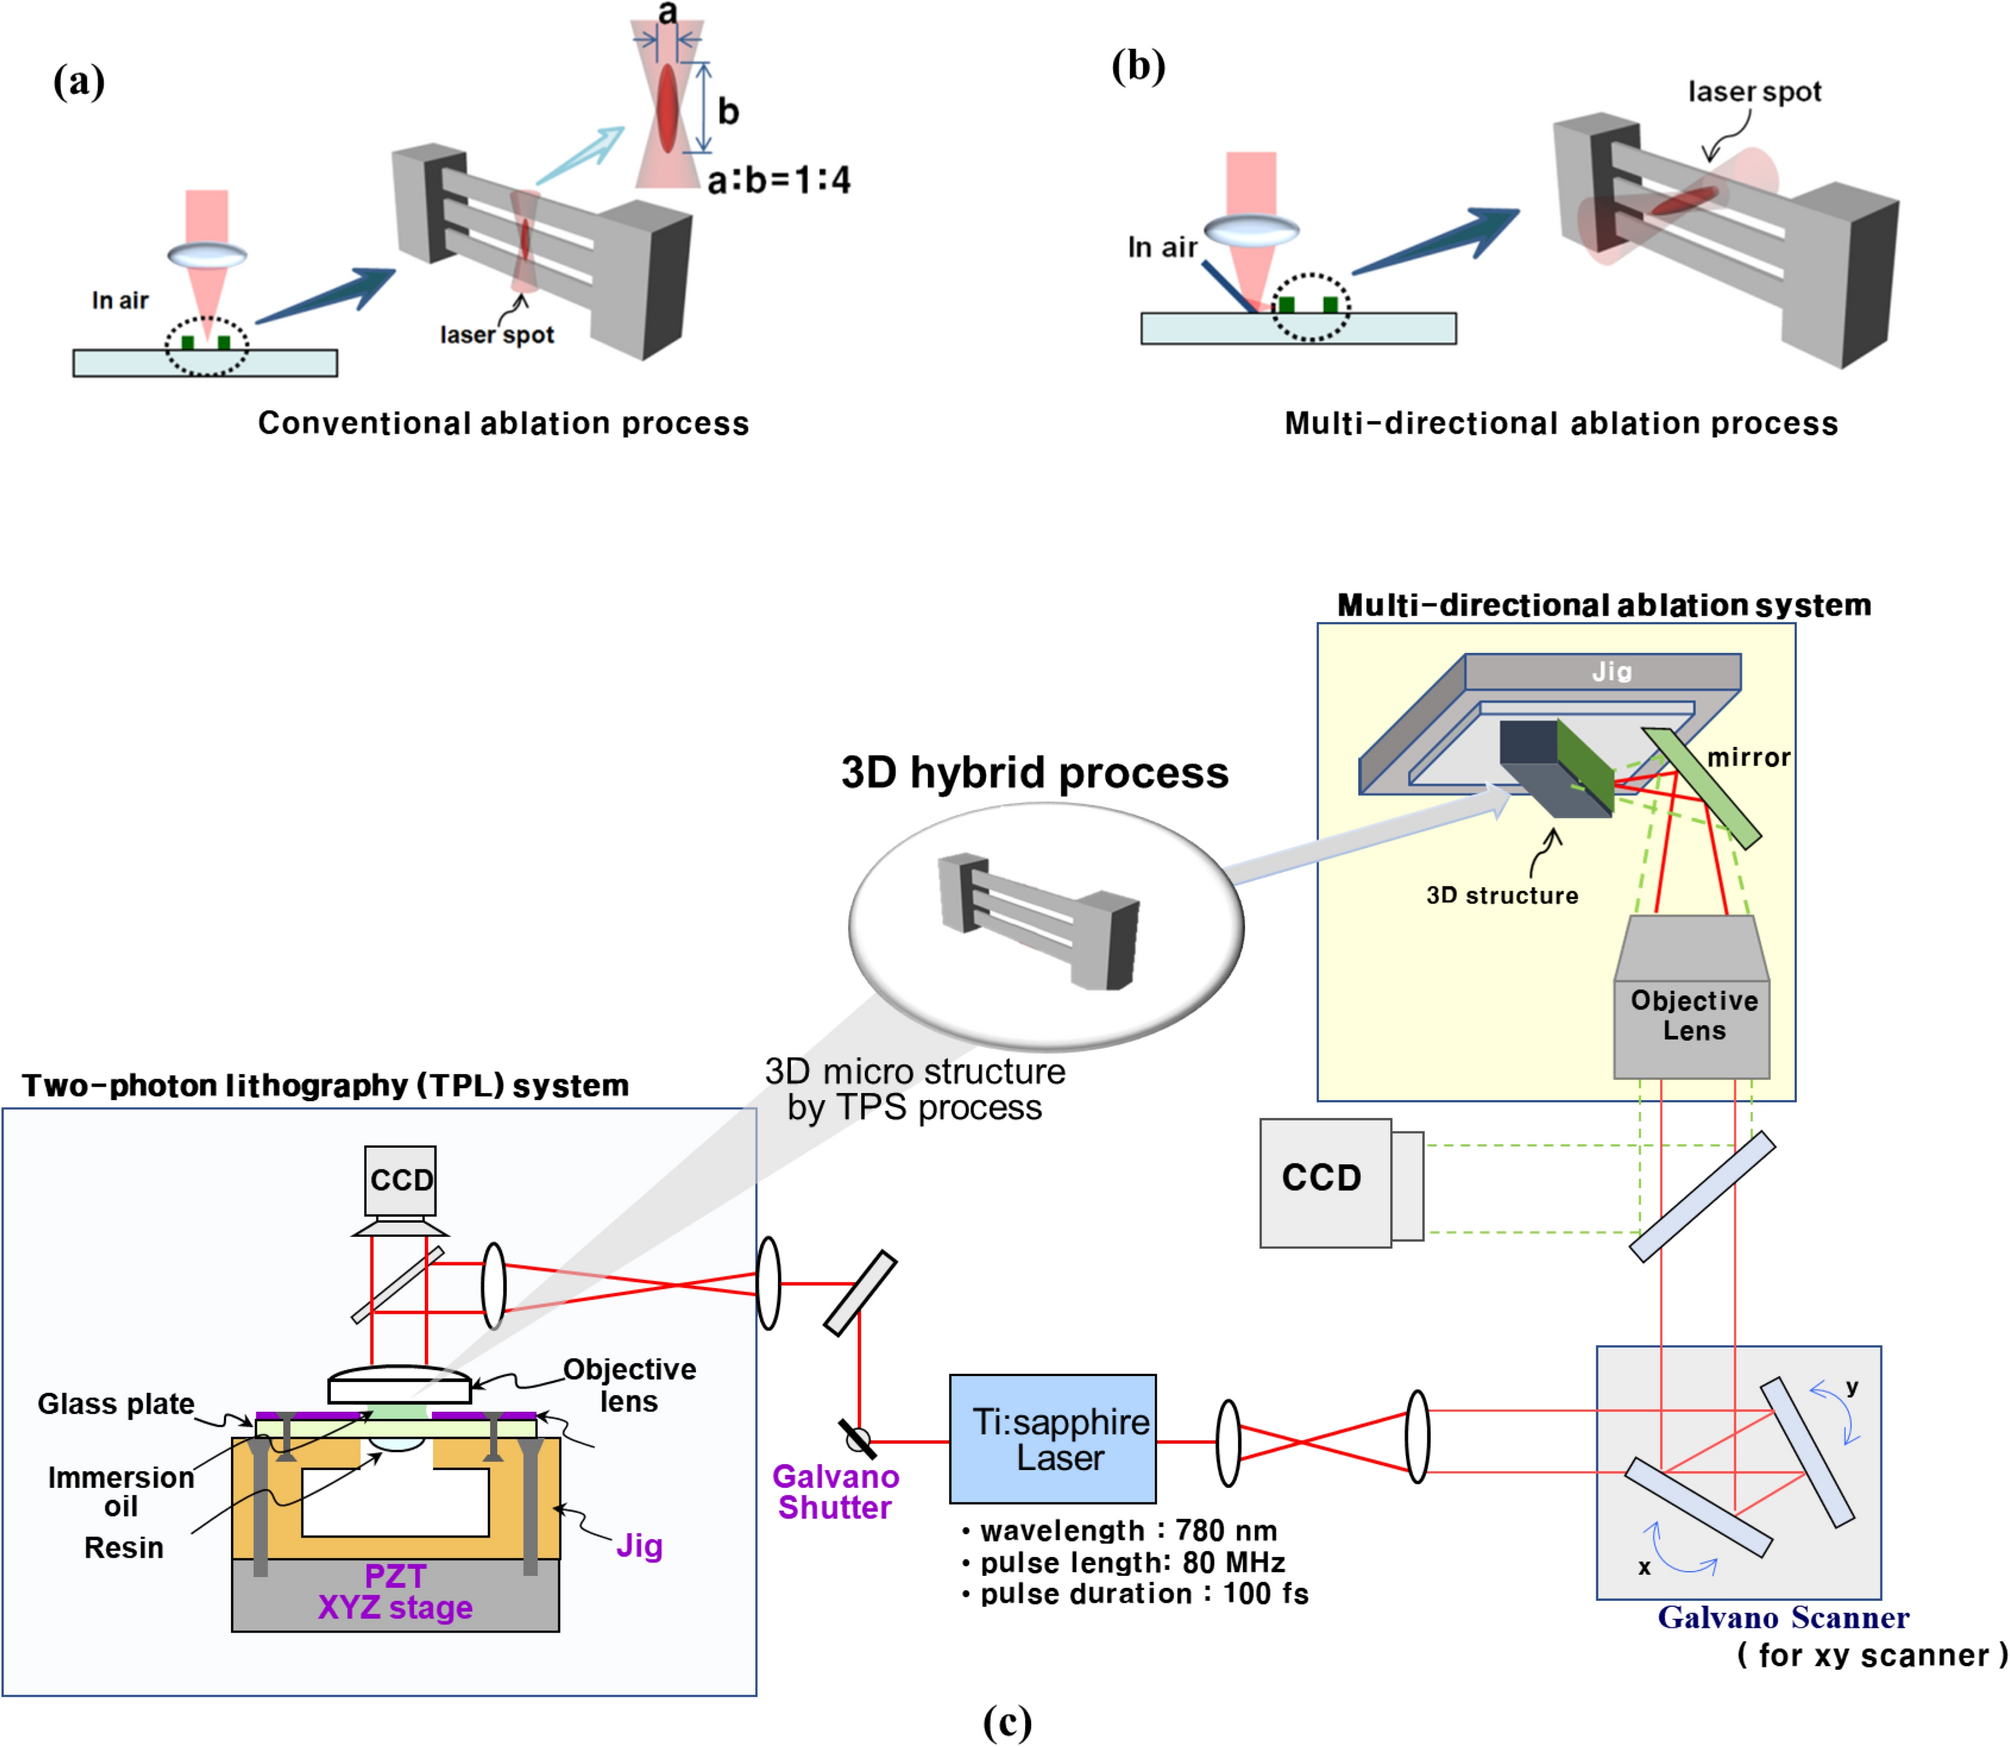 Development of the multi-directional ablation process using the femtosecond  laser to create a pattern on the lateral side of a 3D microstructure